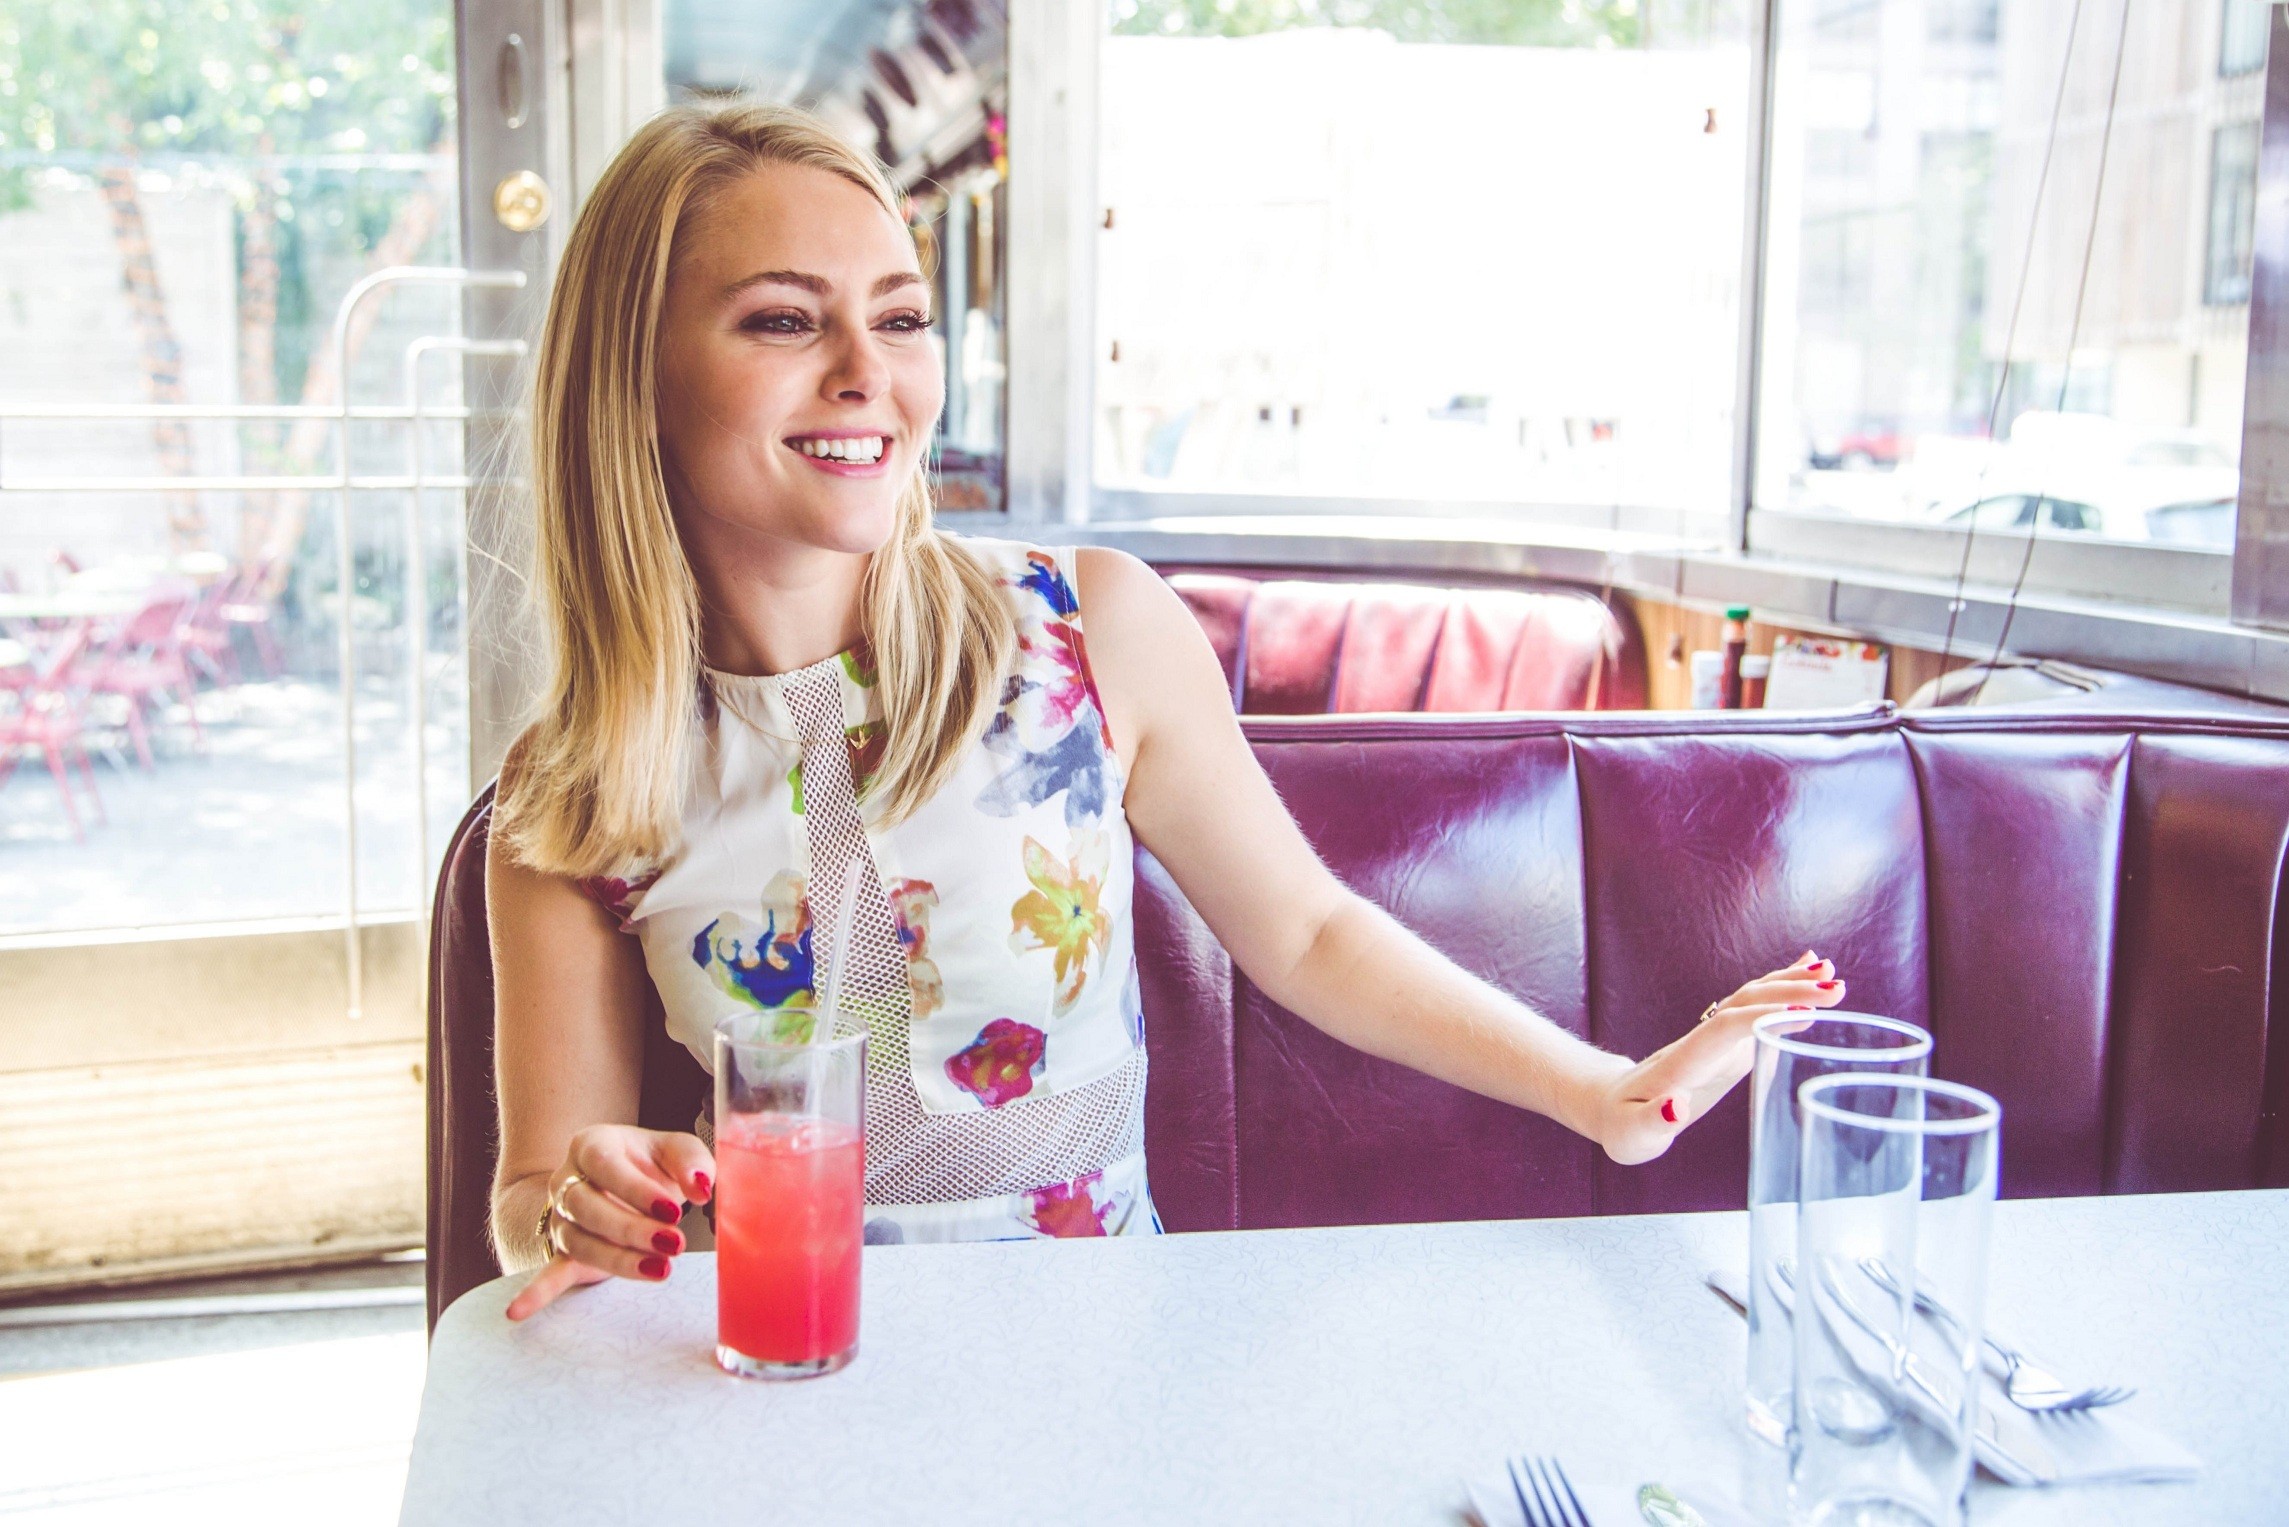 People 2289x1527 AnnaSophia Robb women blonde smiling American women drinking glass red nails painted nails diner dress happy sitting women indoors indoors actress